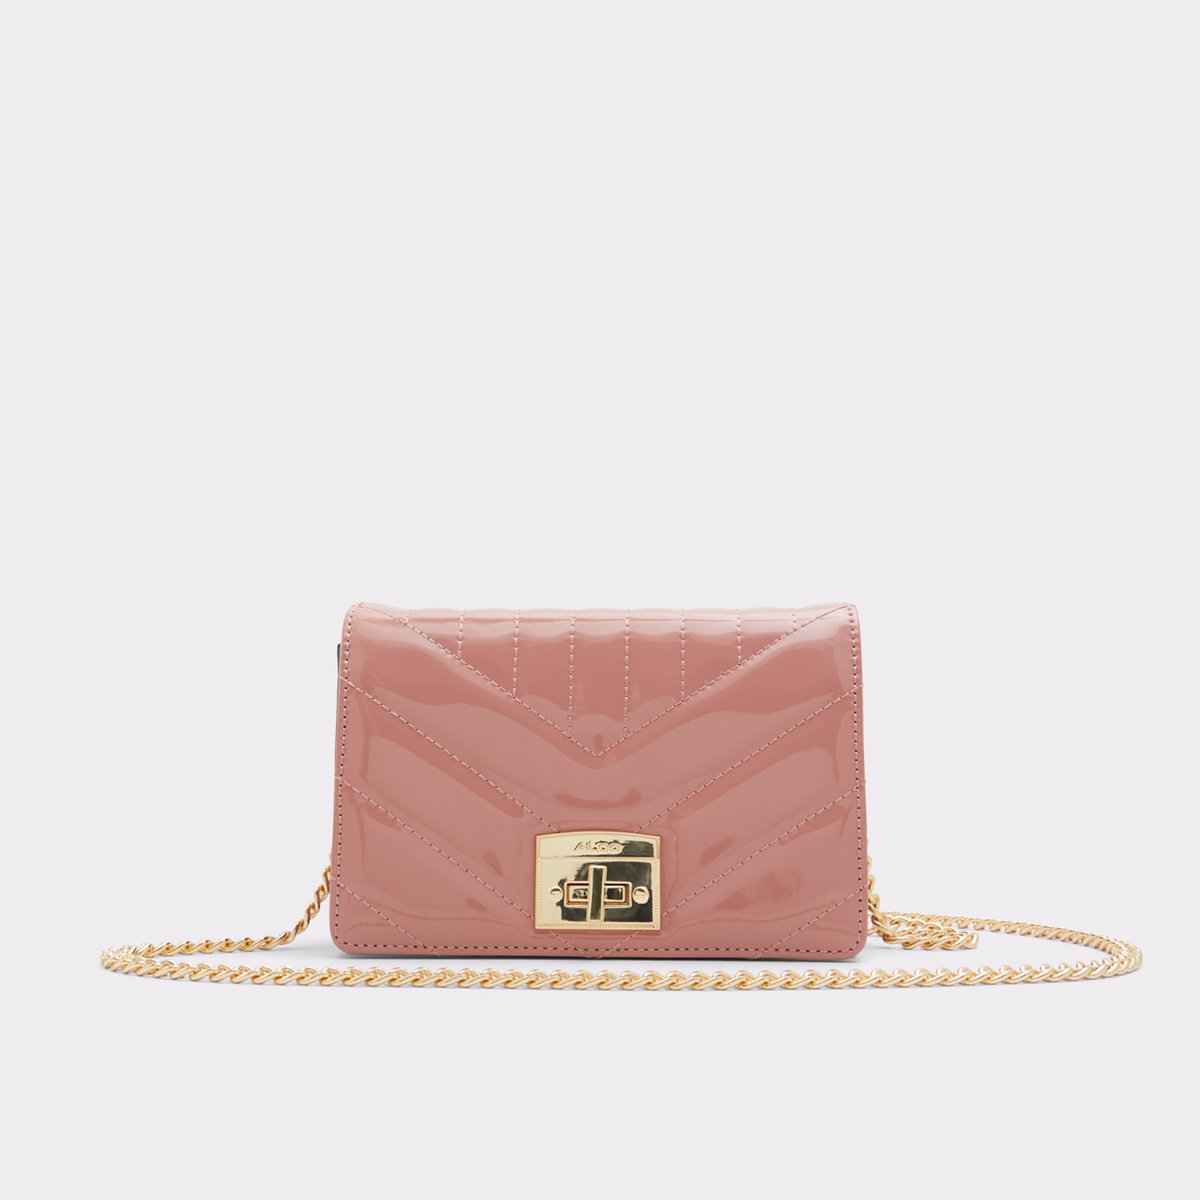 Talýnne Handbags - Colorblock Leather Crossbody Bag in Pink and